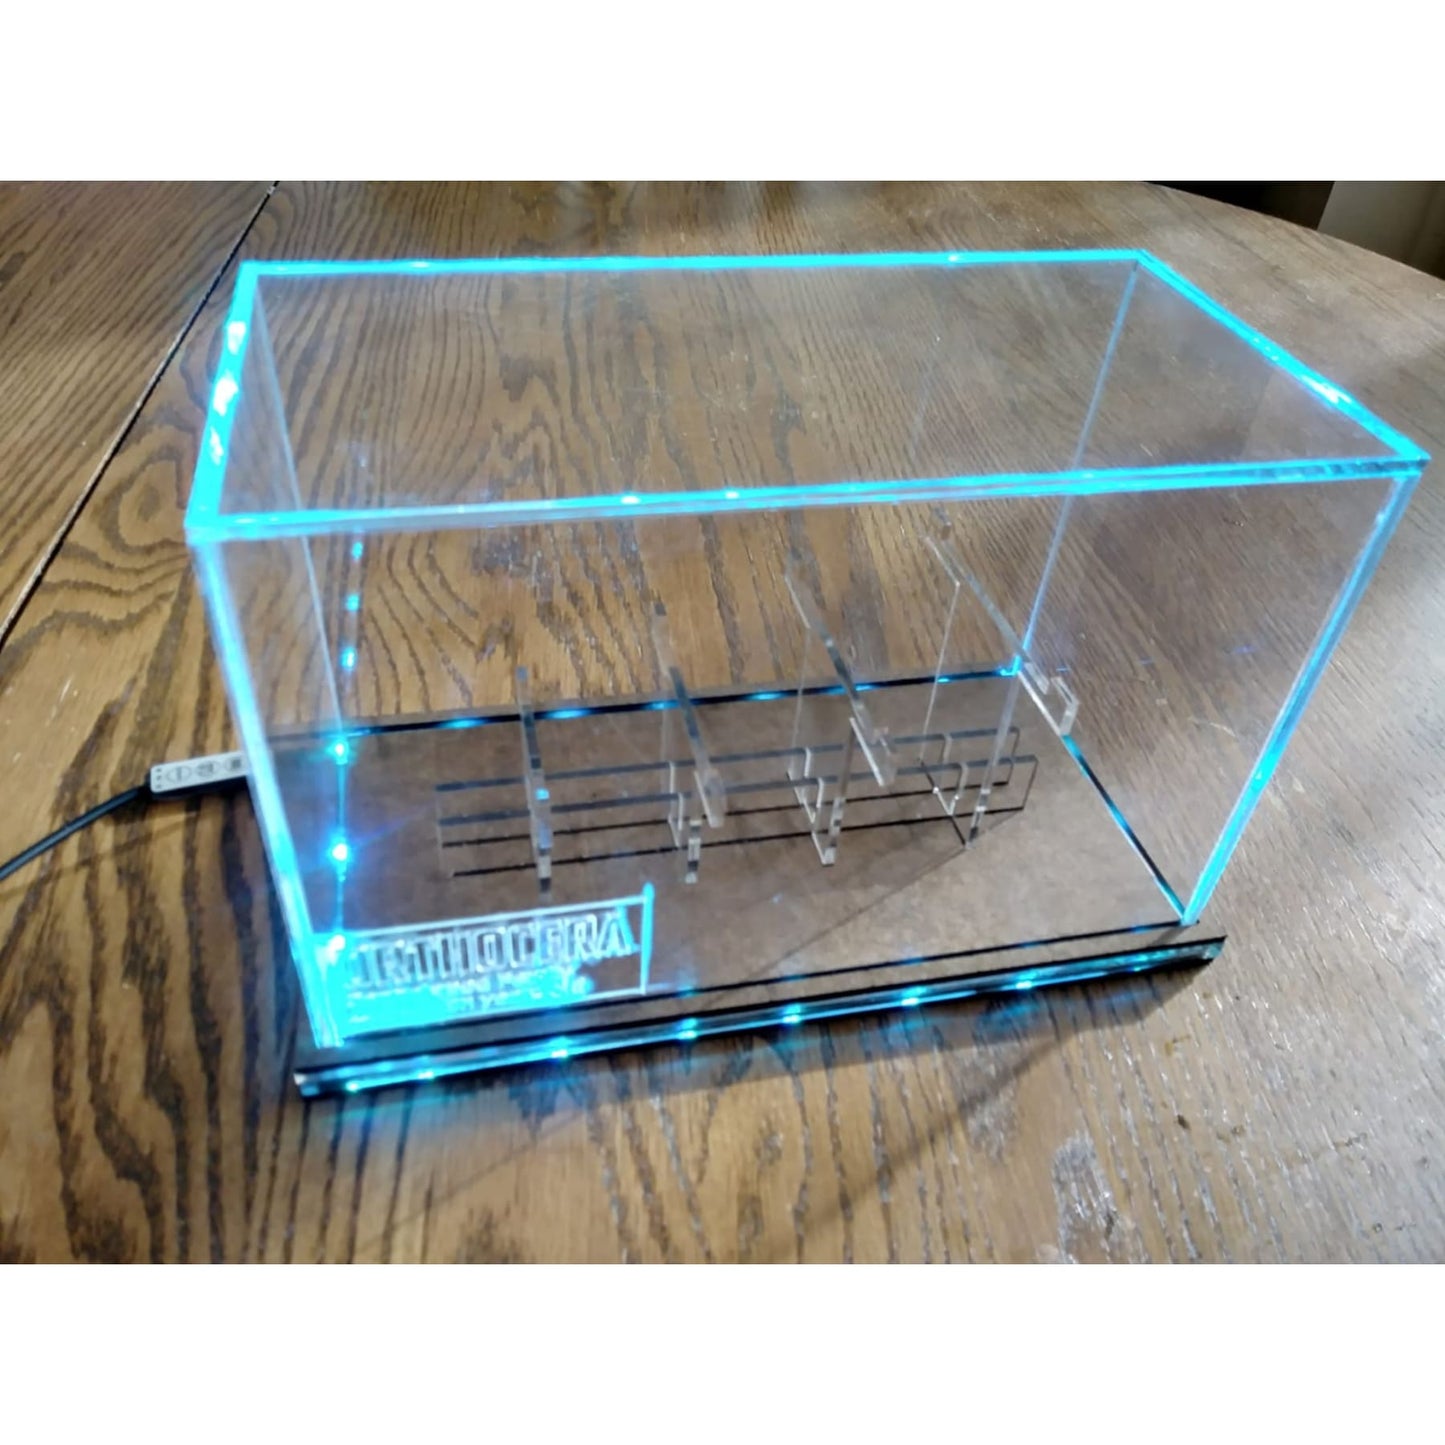 Acrylic LED Display Case for Fossils with Stand, custom made